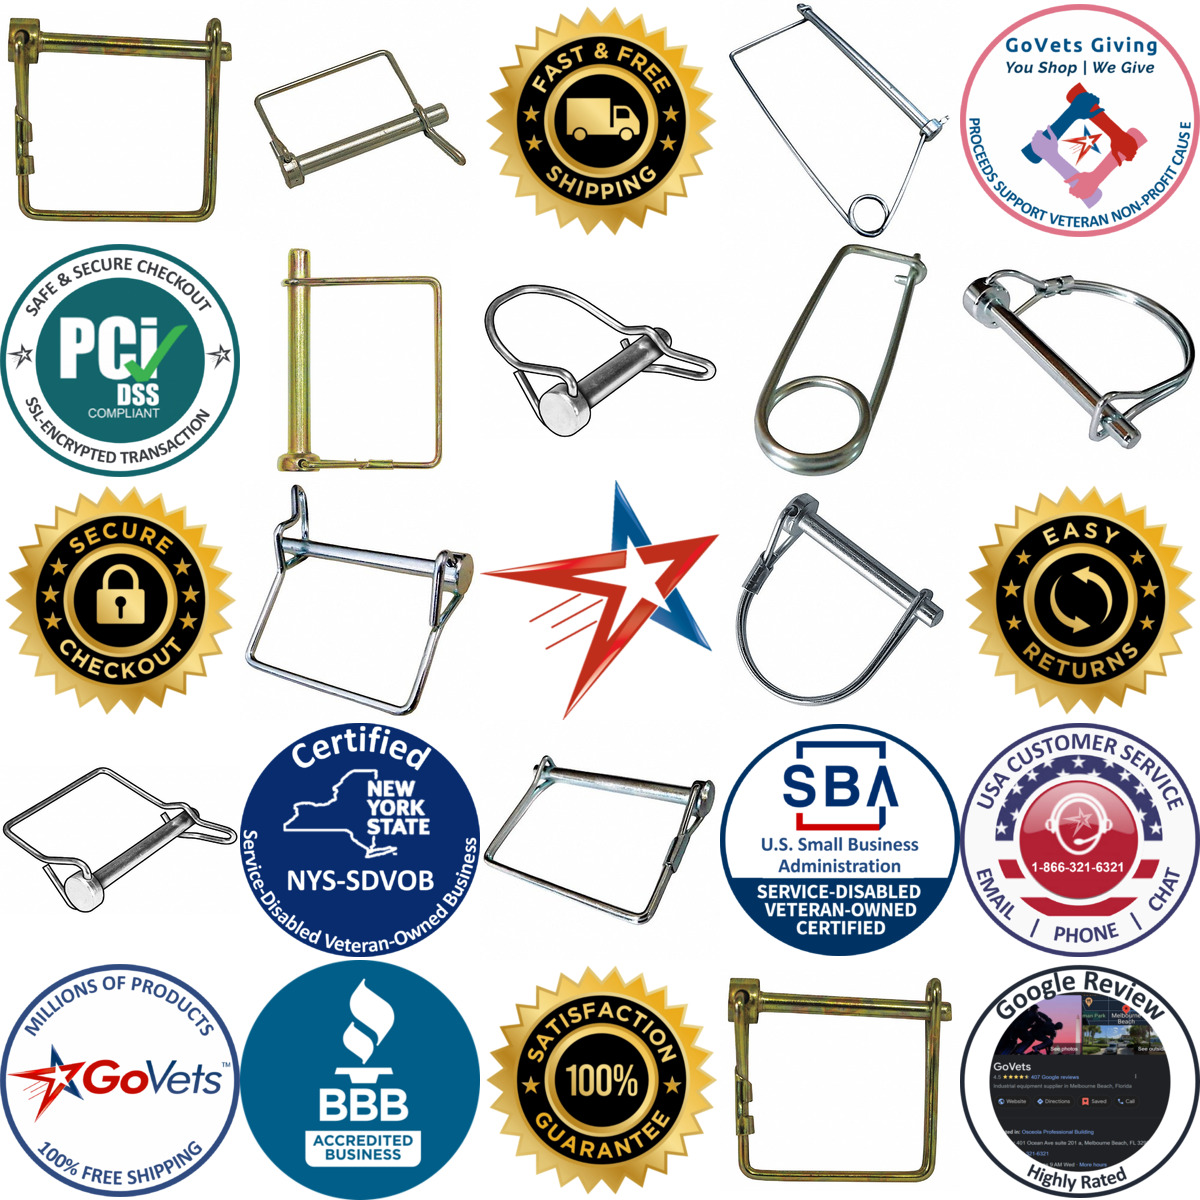 A selection of Safety Pins products on GoVets